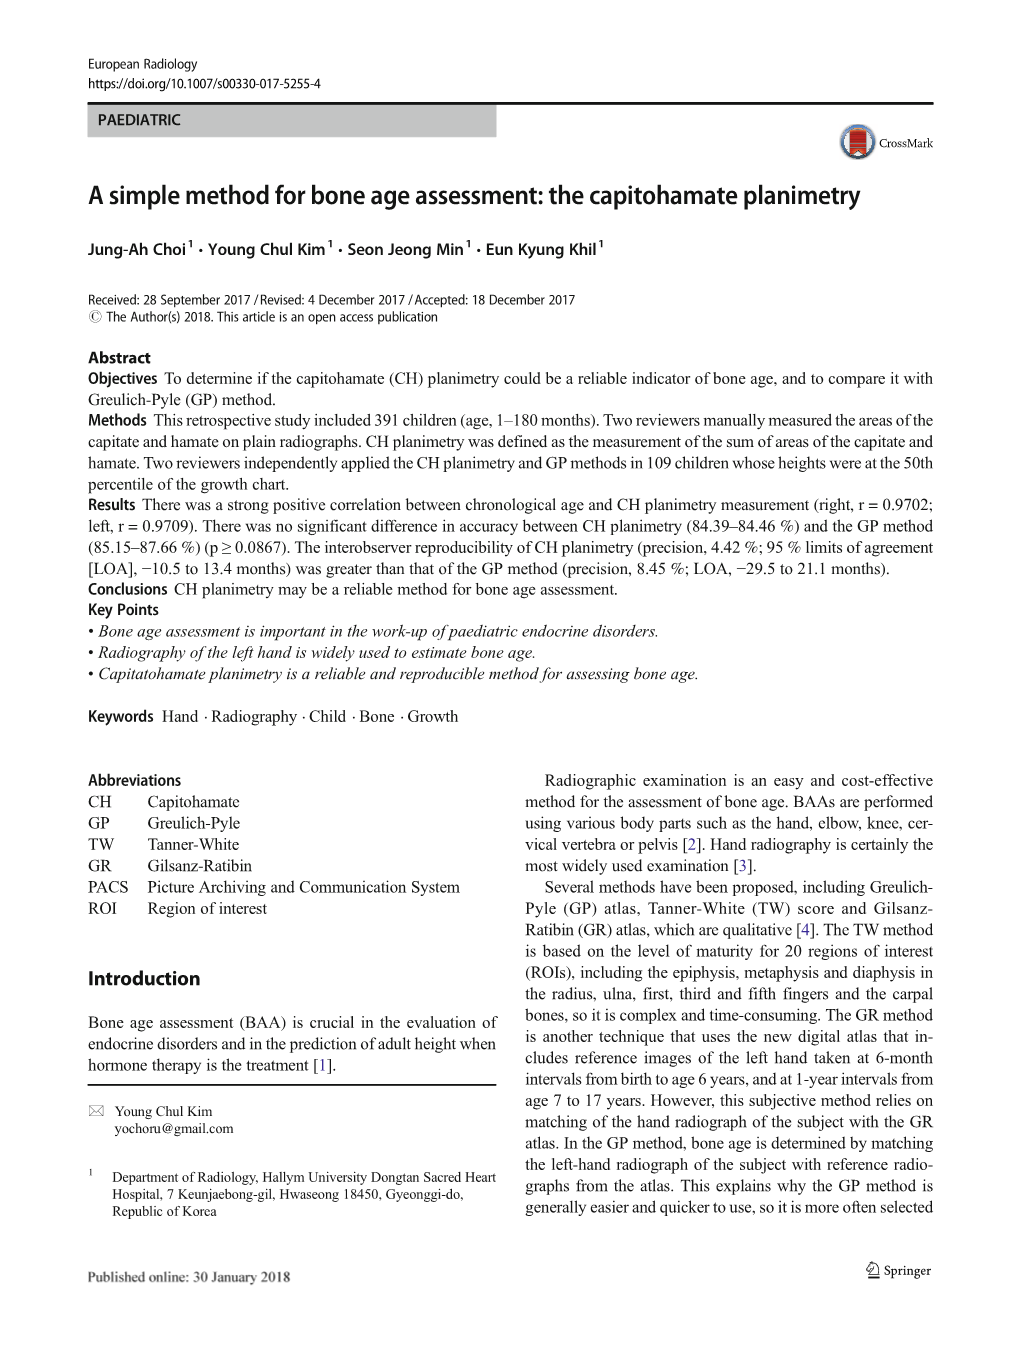 A Simple Method for Bone Age Assessment: the Capitohamate Planimetry